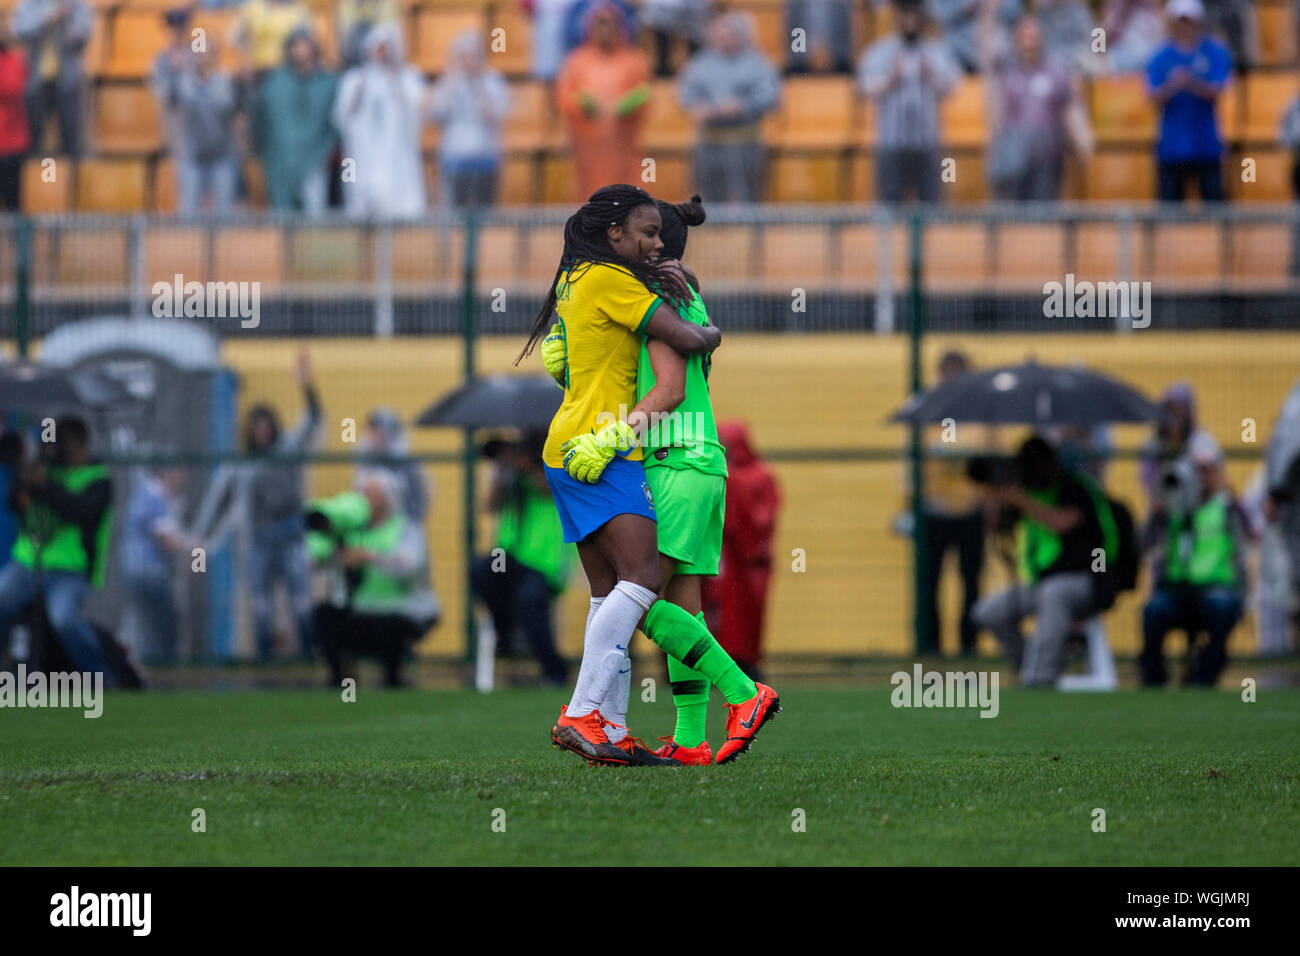 SÃO PAULO, SP - 01.09.2019: BRAZIL X CHILE - Ludmila comforts goalkeeper Aline Reis after the defeat to Chile. Uber Women&#3Soccer Cup Cup - Chilean national team wins the Brazilian women's soccer team on penalties after a 0-0 d-0 draw in normal time. With a lot of rain, which disrupted the football of both teams, and with audience of 15,047 paying and income of $ 174,073.00. The match took place this Sunday, September 1st, 2019, at Pacaembu Stadium, in São Paulo. (Photo: Van Campos/Fotoarena) Stock Photo